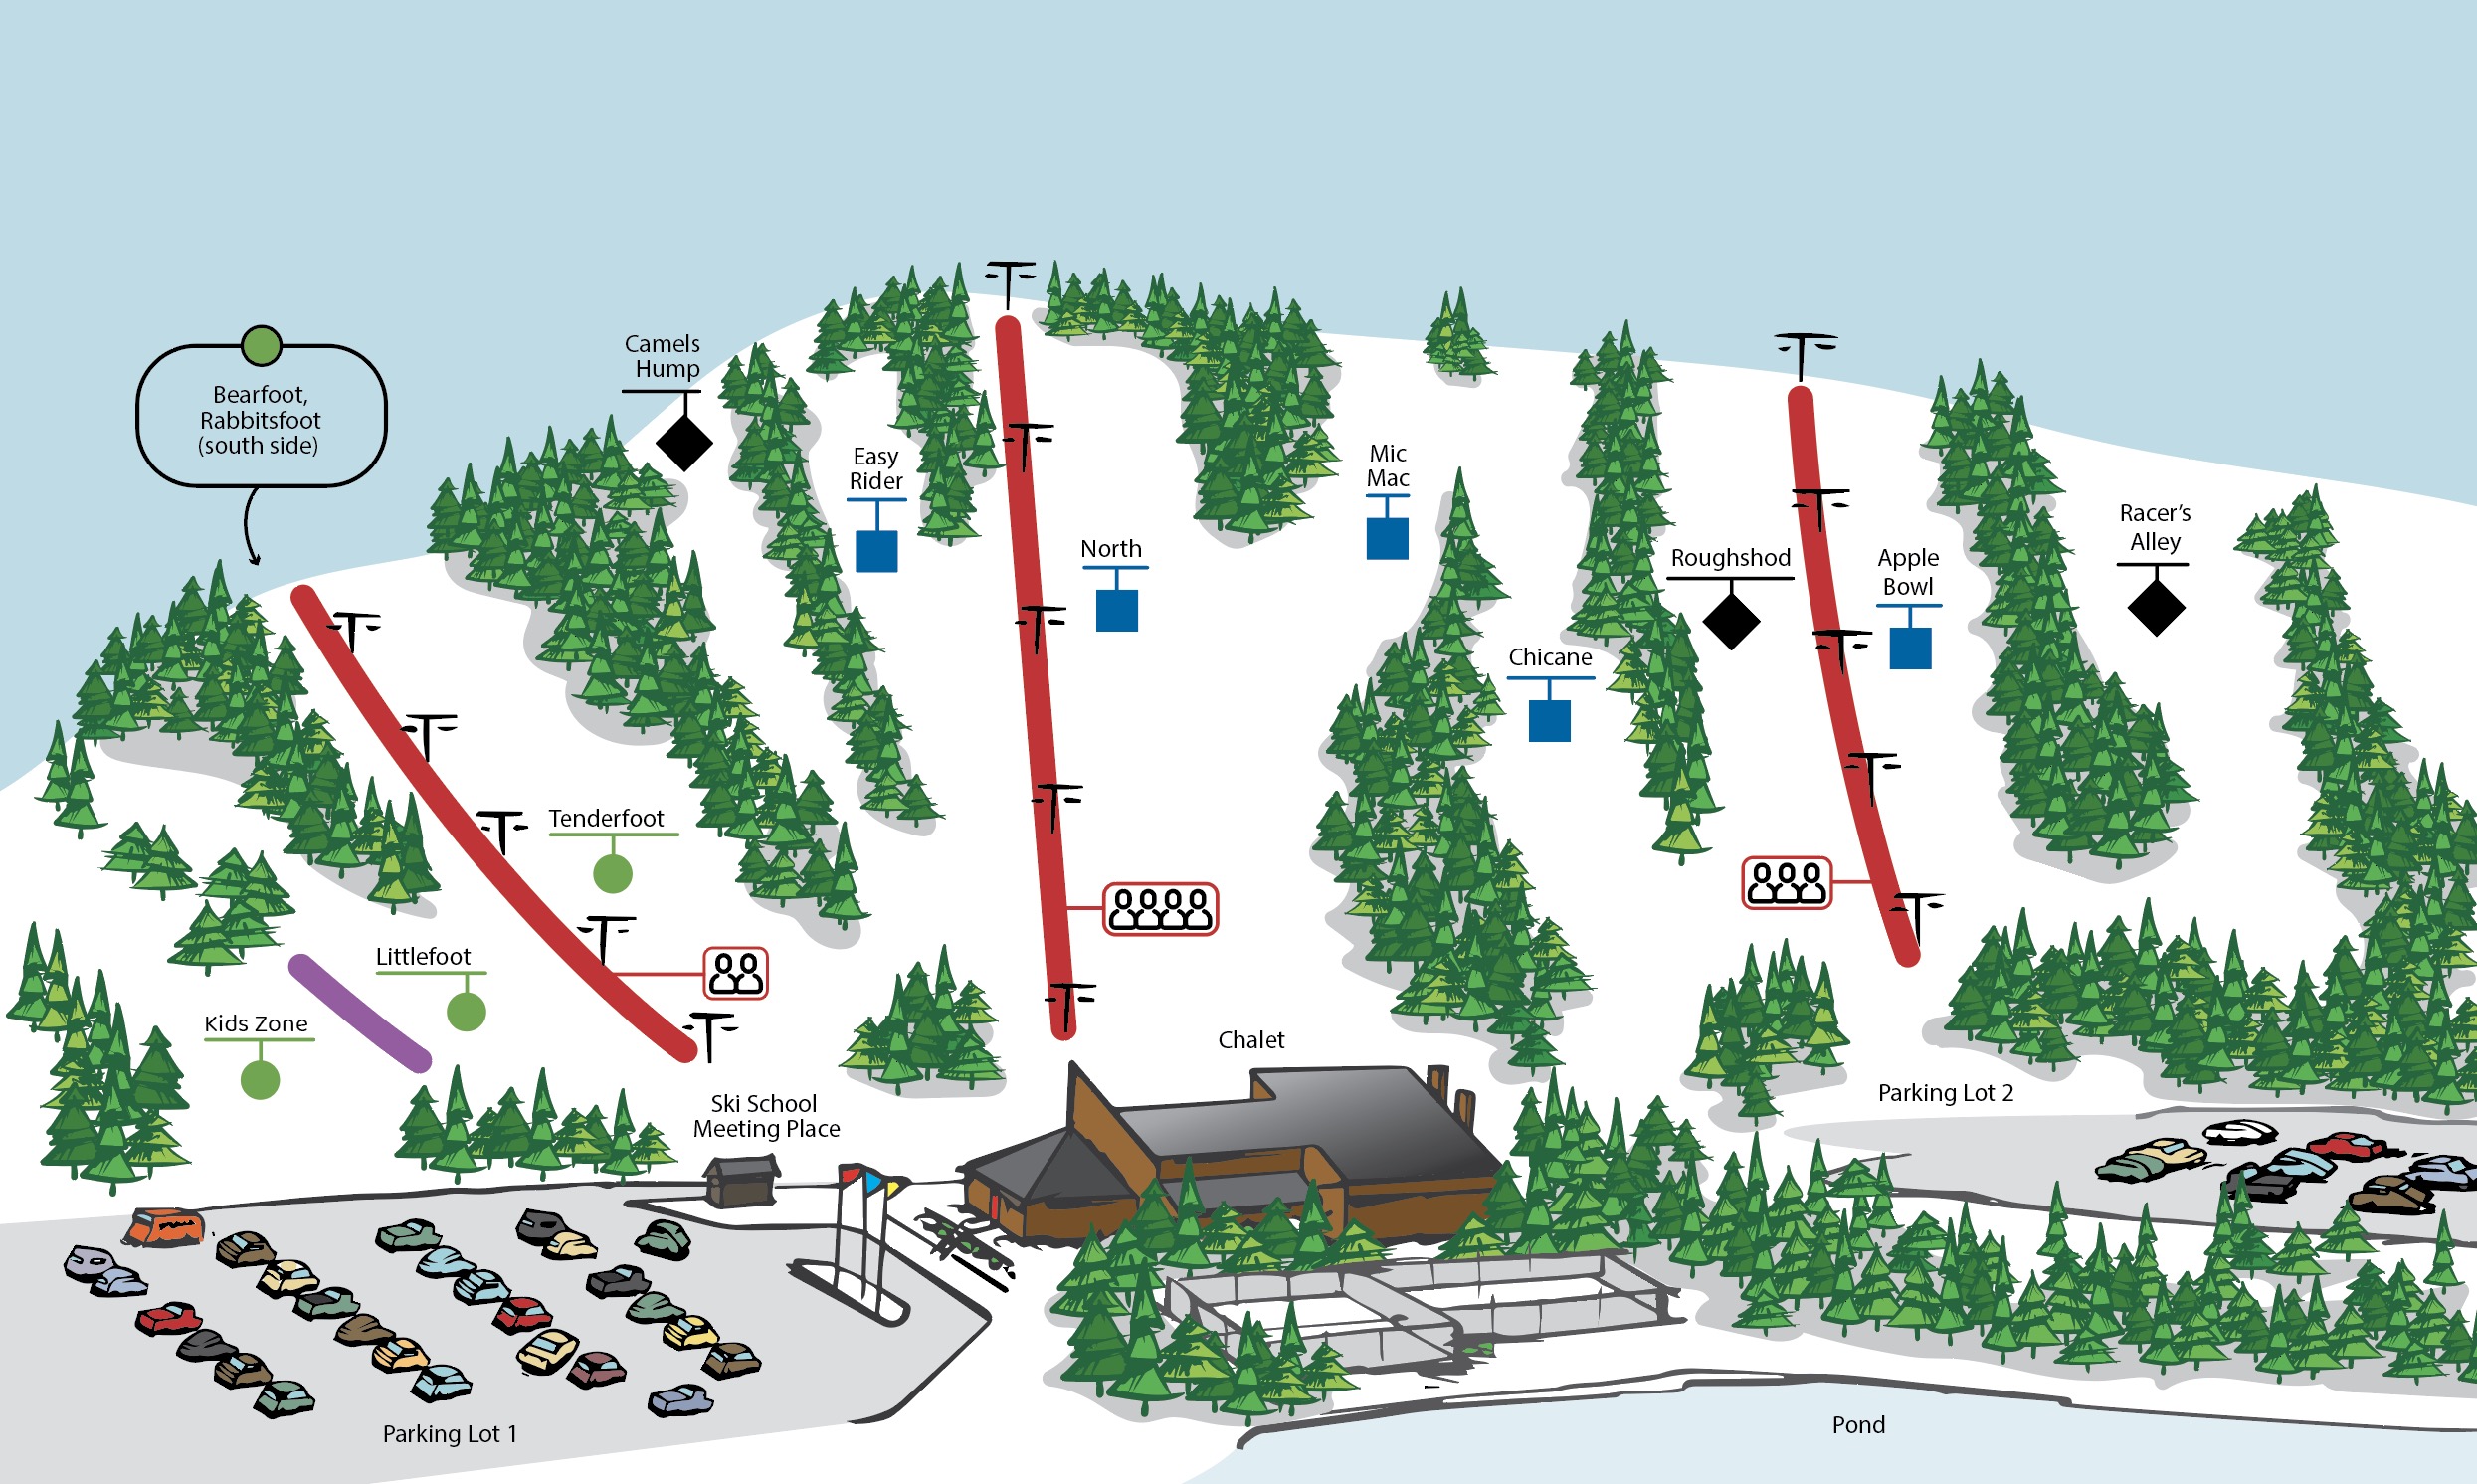 Chicopee site/trail map showing the resort grounds, chalet, parking lots, and trails.